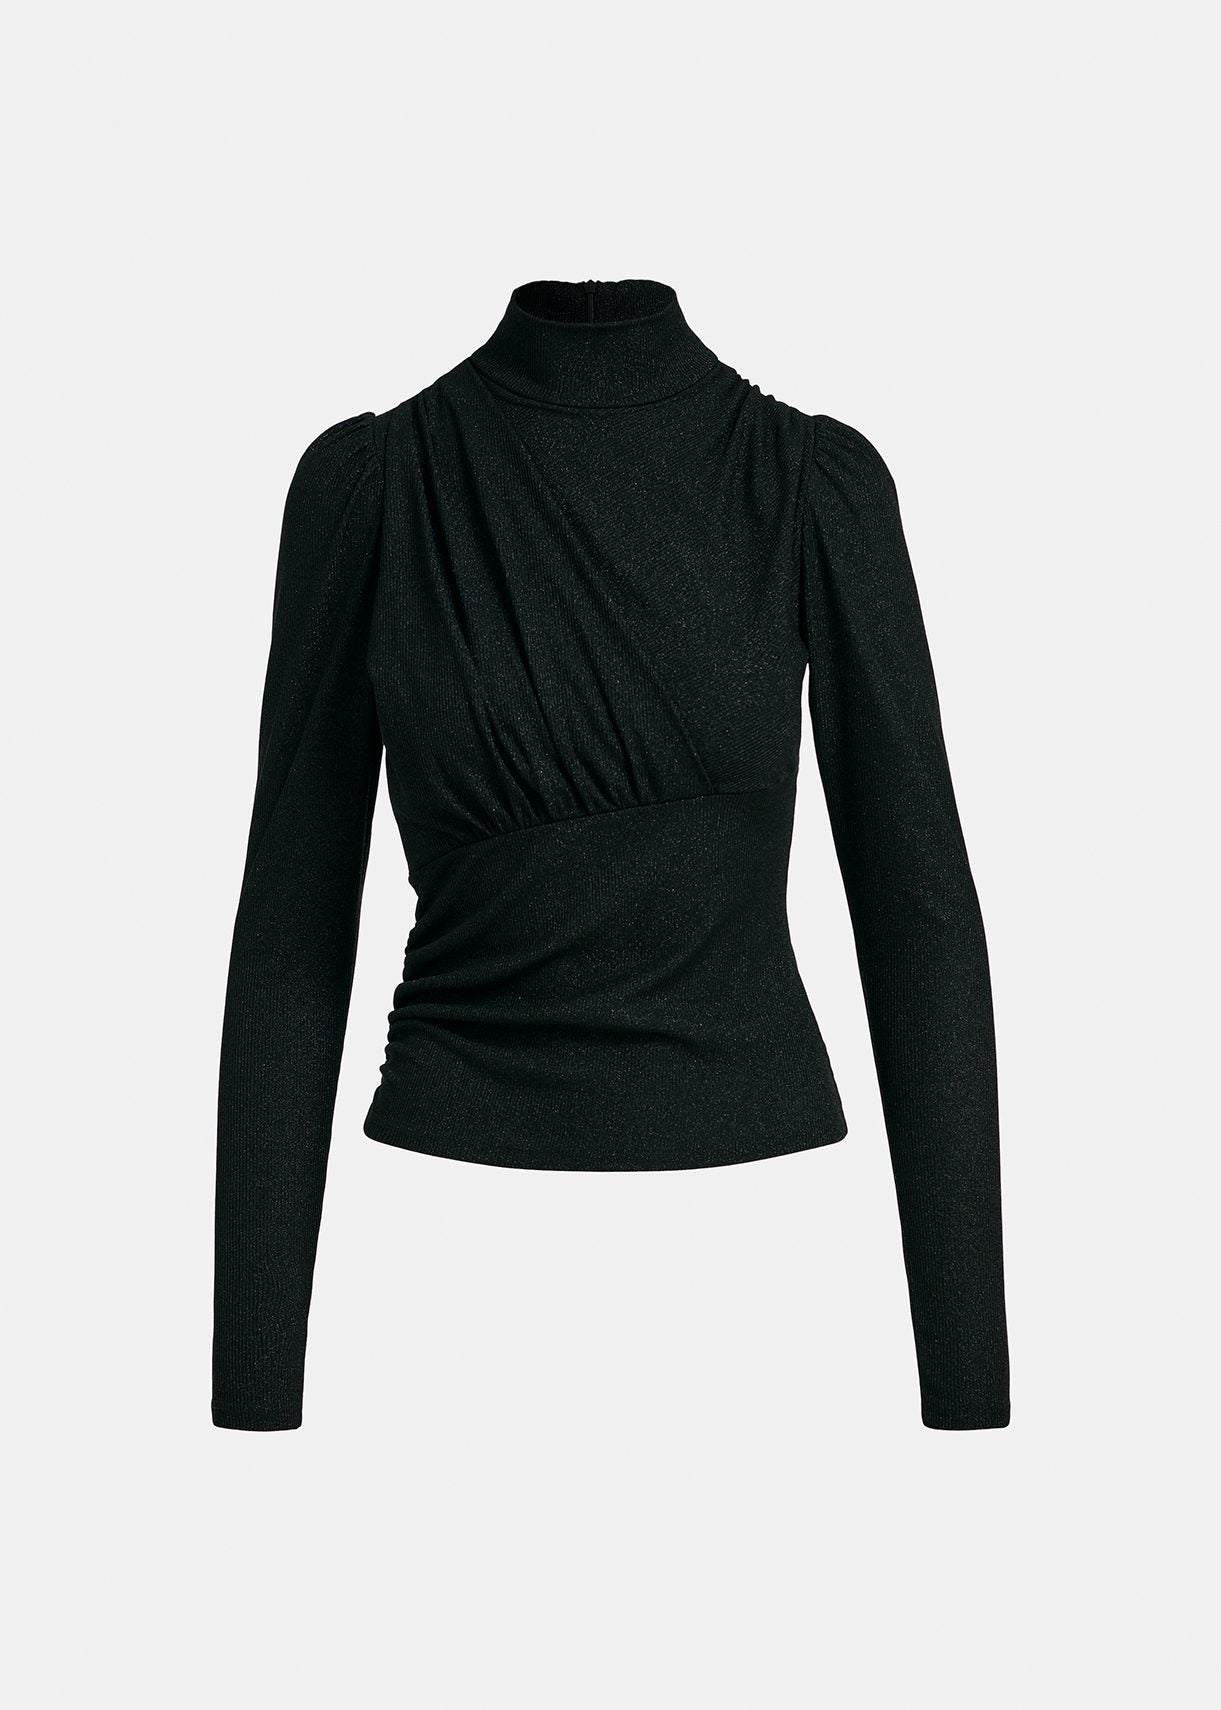 Black long sleeve top with ruching on chest.